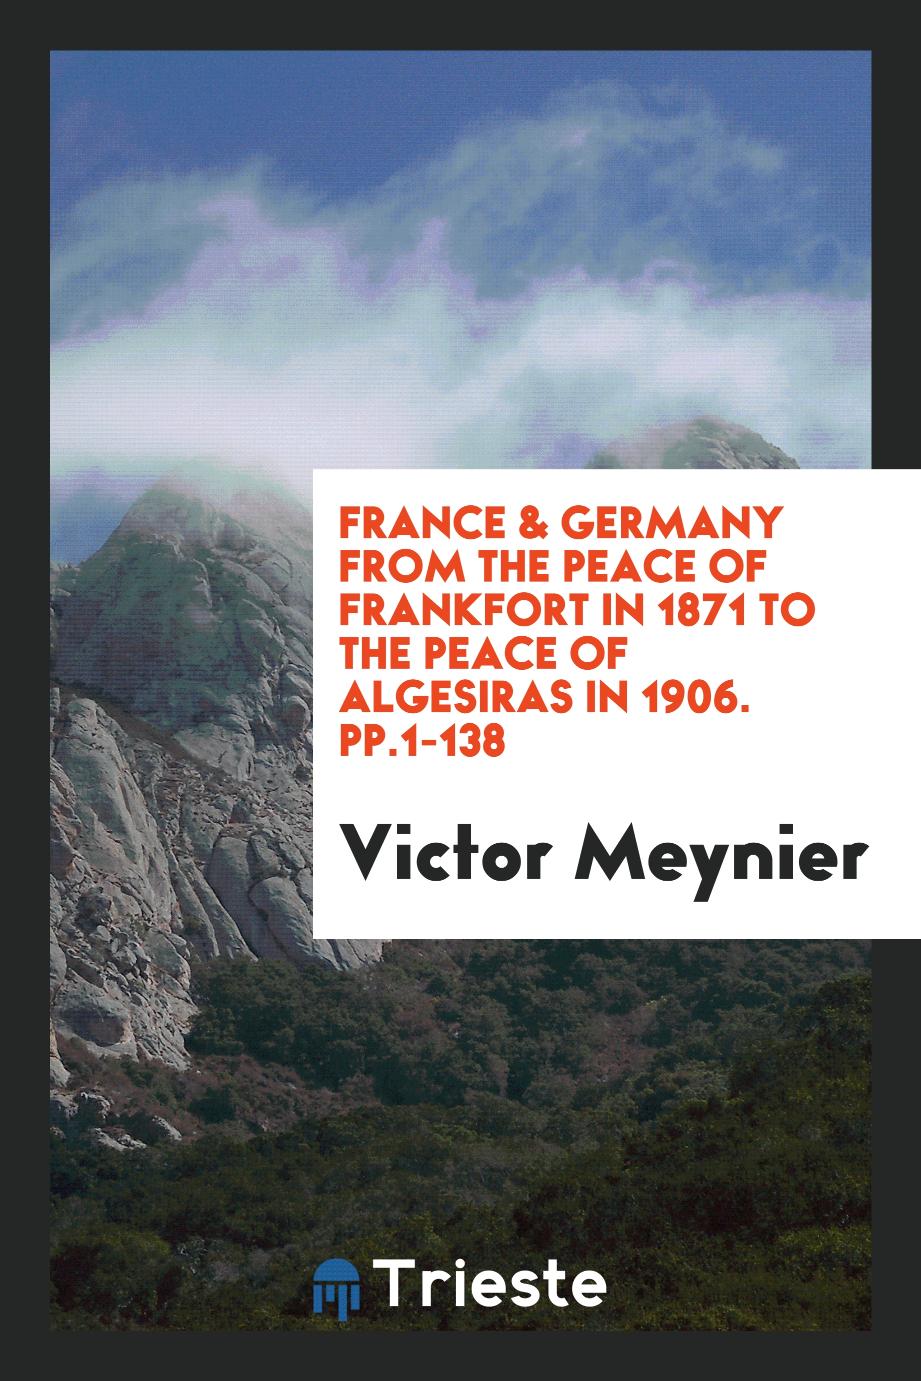 France & Germany from the Peace of Frankfort in 1871 to the Peace of Algesiras in 1906. pp.1-138